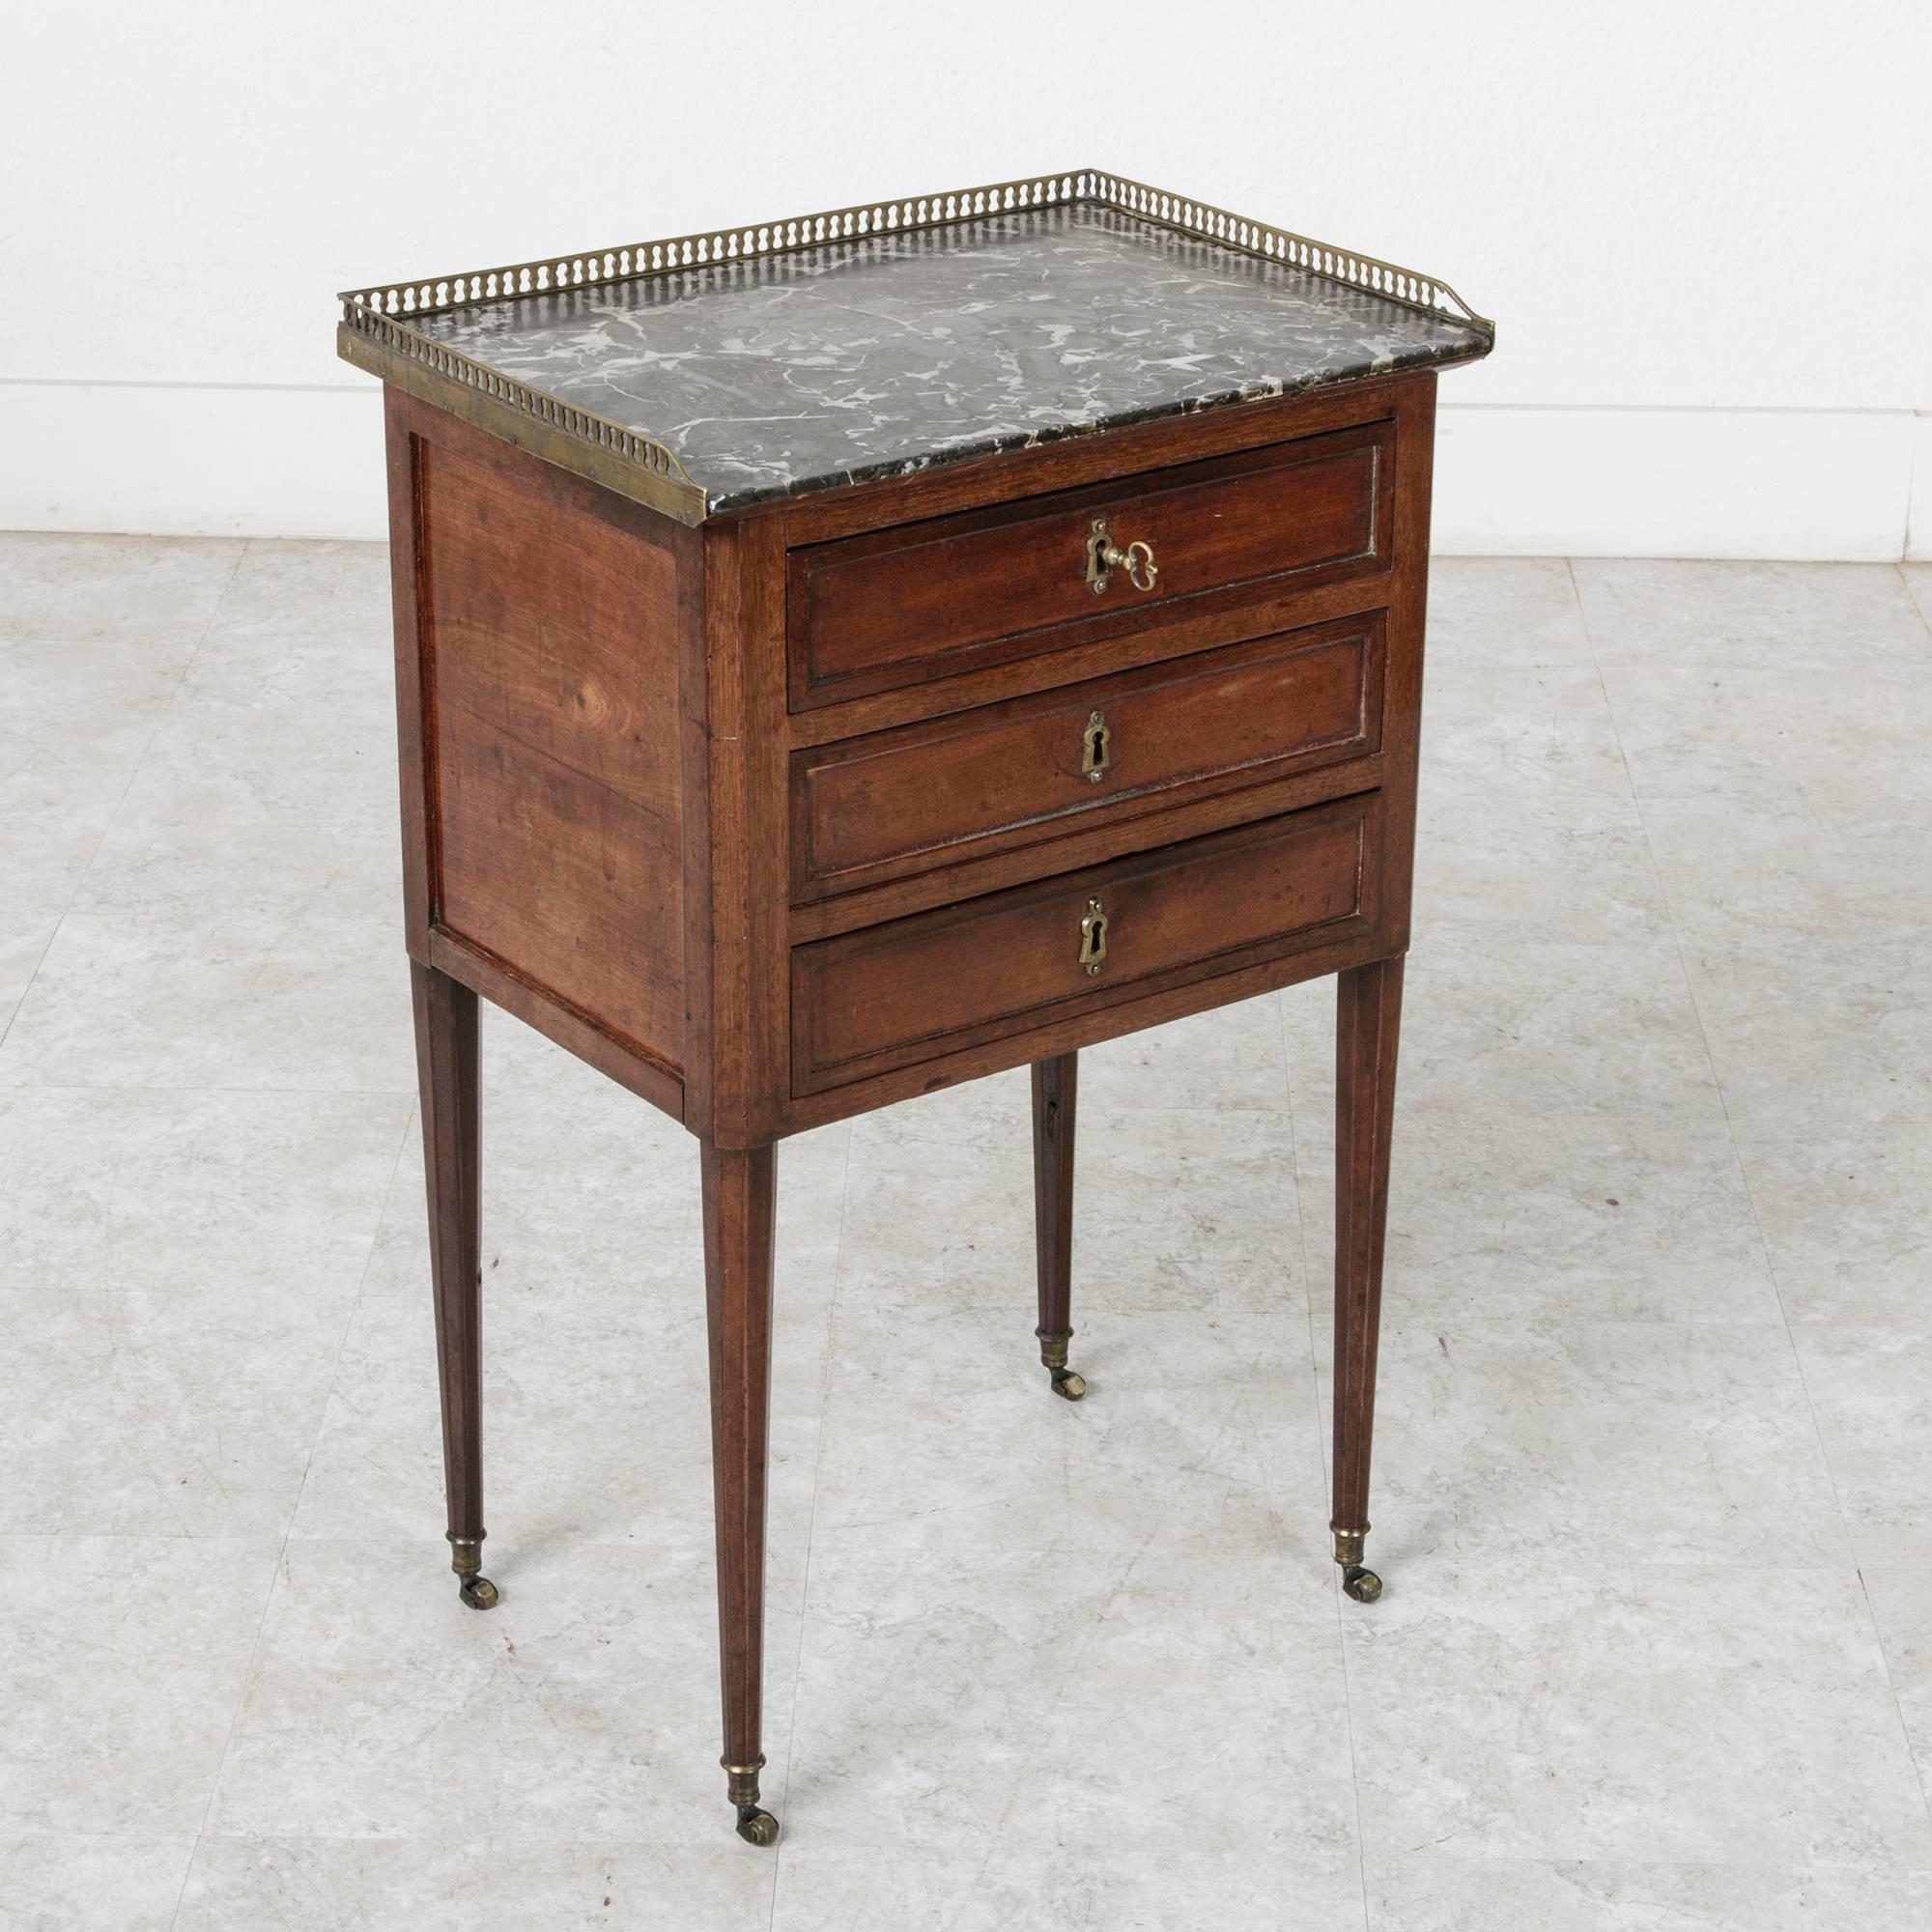 Found in Deauville, France, this small-scale, 18th century mahogany nightstand or side table features a Saint Anne marble top surrounded by a bronze gallery. Its octagonal, tapered legs rise on bronze casters. With three hand hewn, dovetailed